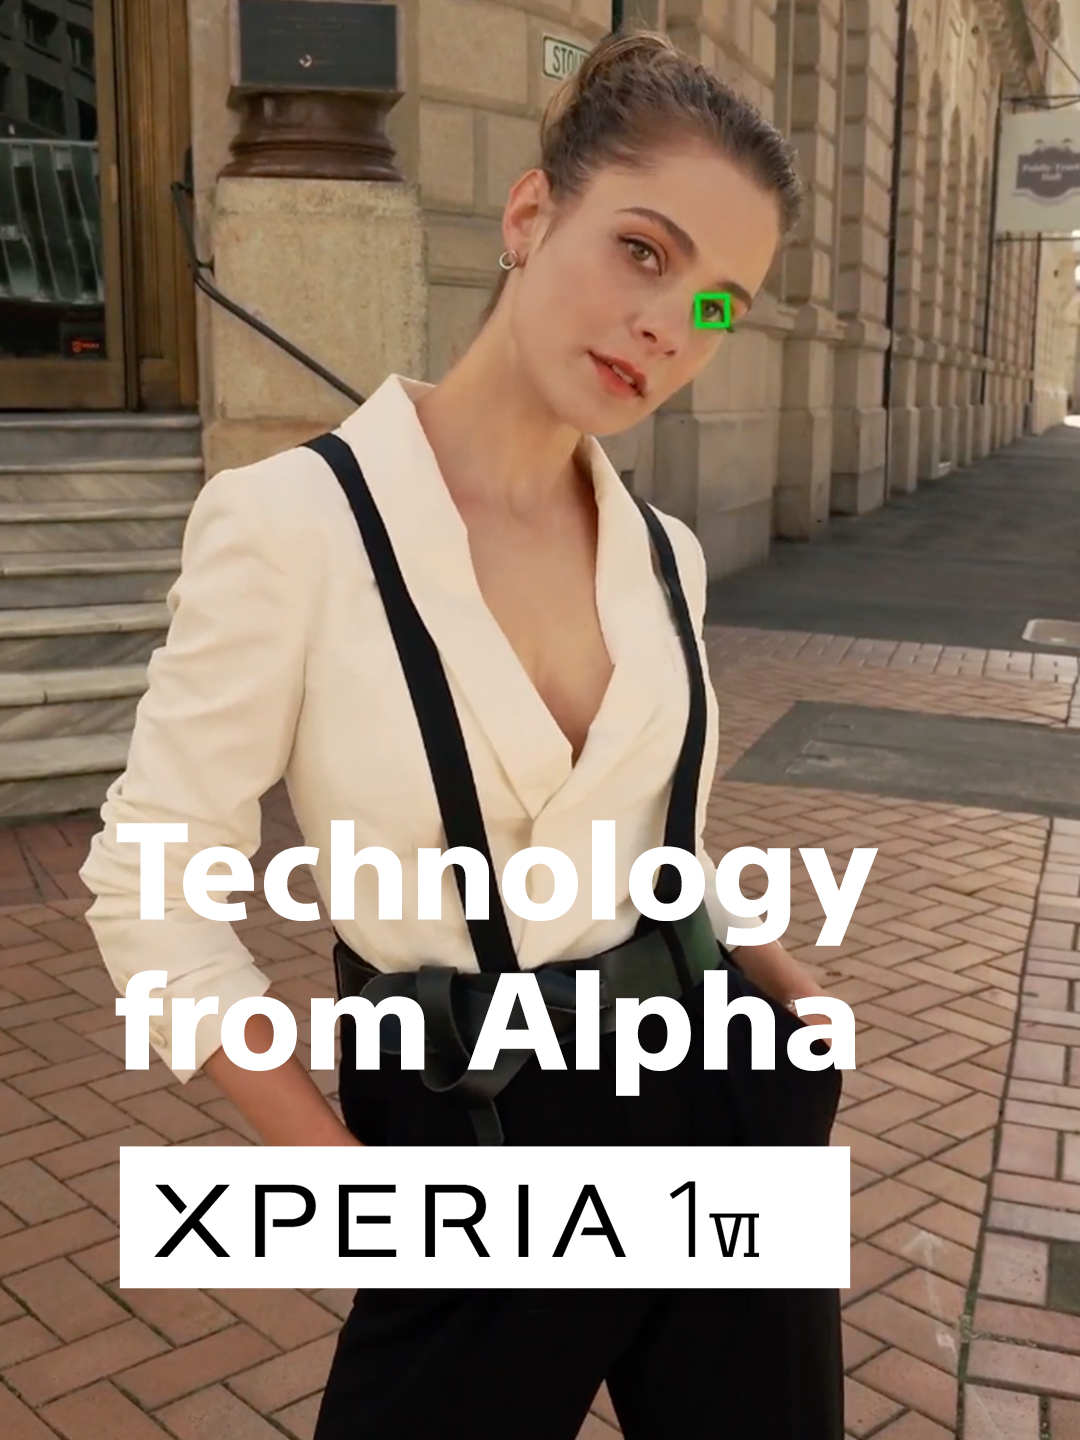 Technology from Alpha, packed into #Xperia1VI 📷 Witness the finesse of Xperia's auto focus, Real-time Eye AF, and Real-time tracking - now further enhanced by Sony's  human pose estimation AI technology. #SonyXperia #Xperia1VI #ZoomIntoWonder #EyeAF